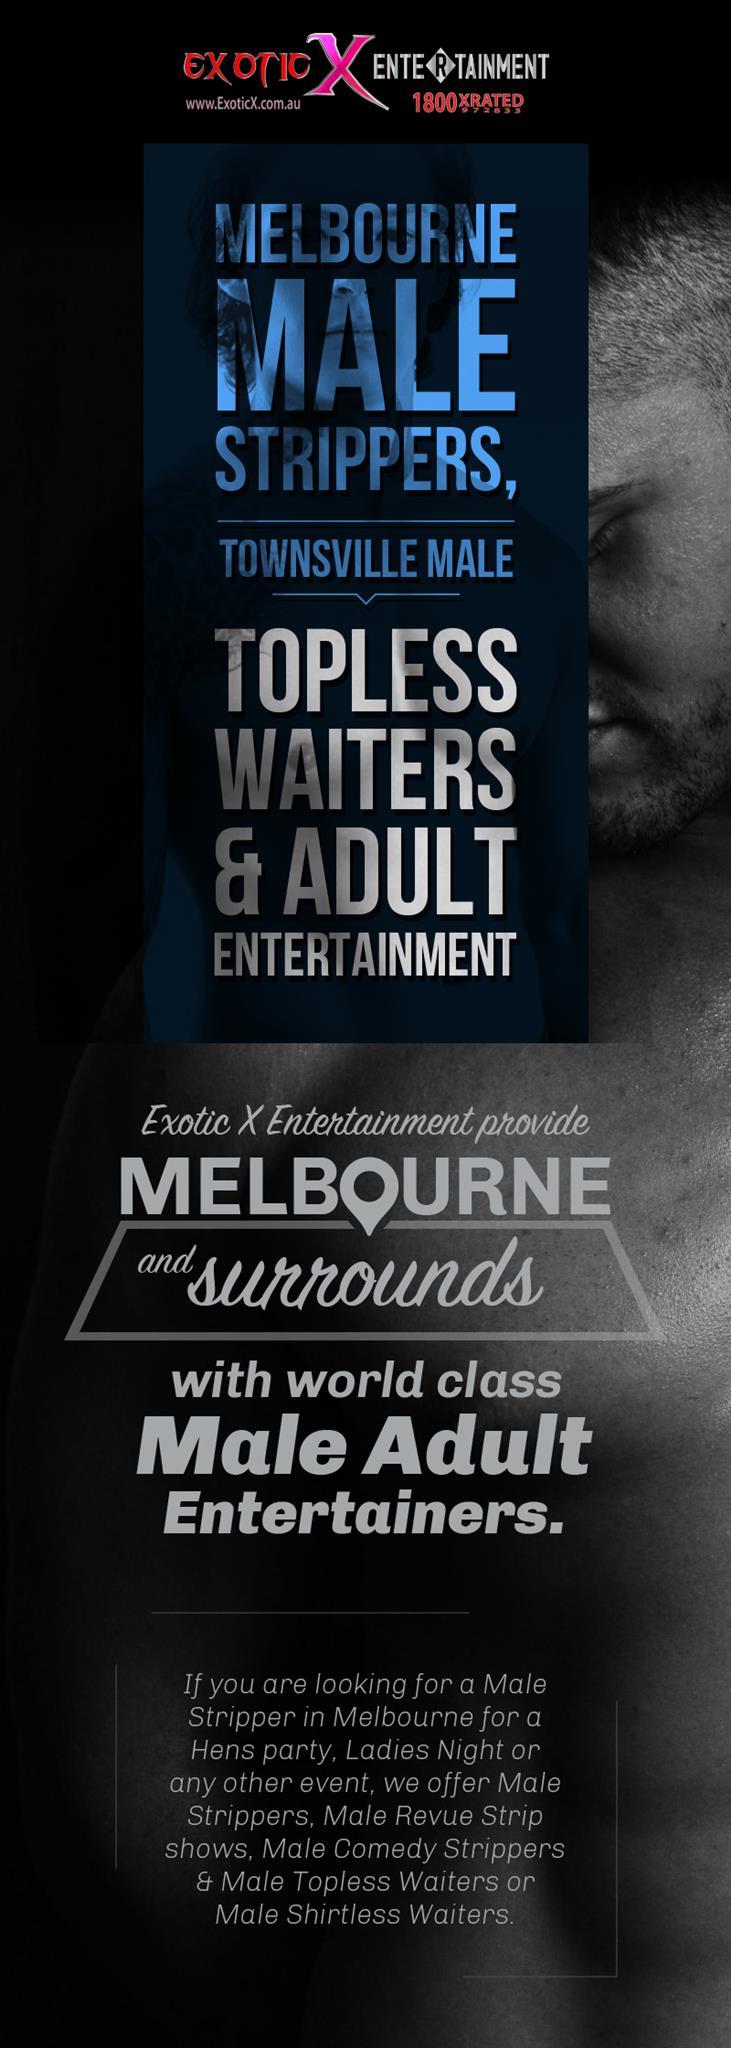 Hire Premium Male Strippers in Melbourne from Exotic X Entertainment